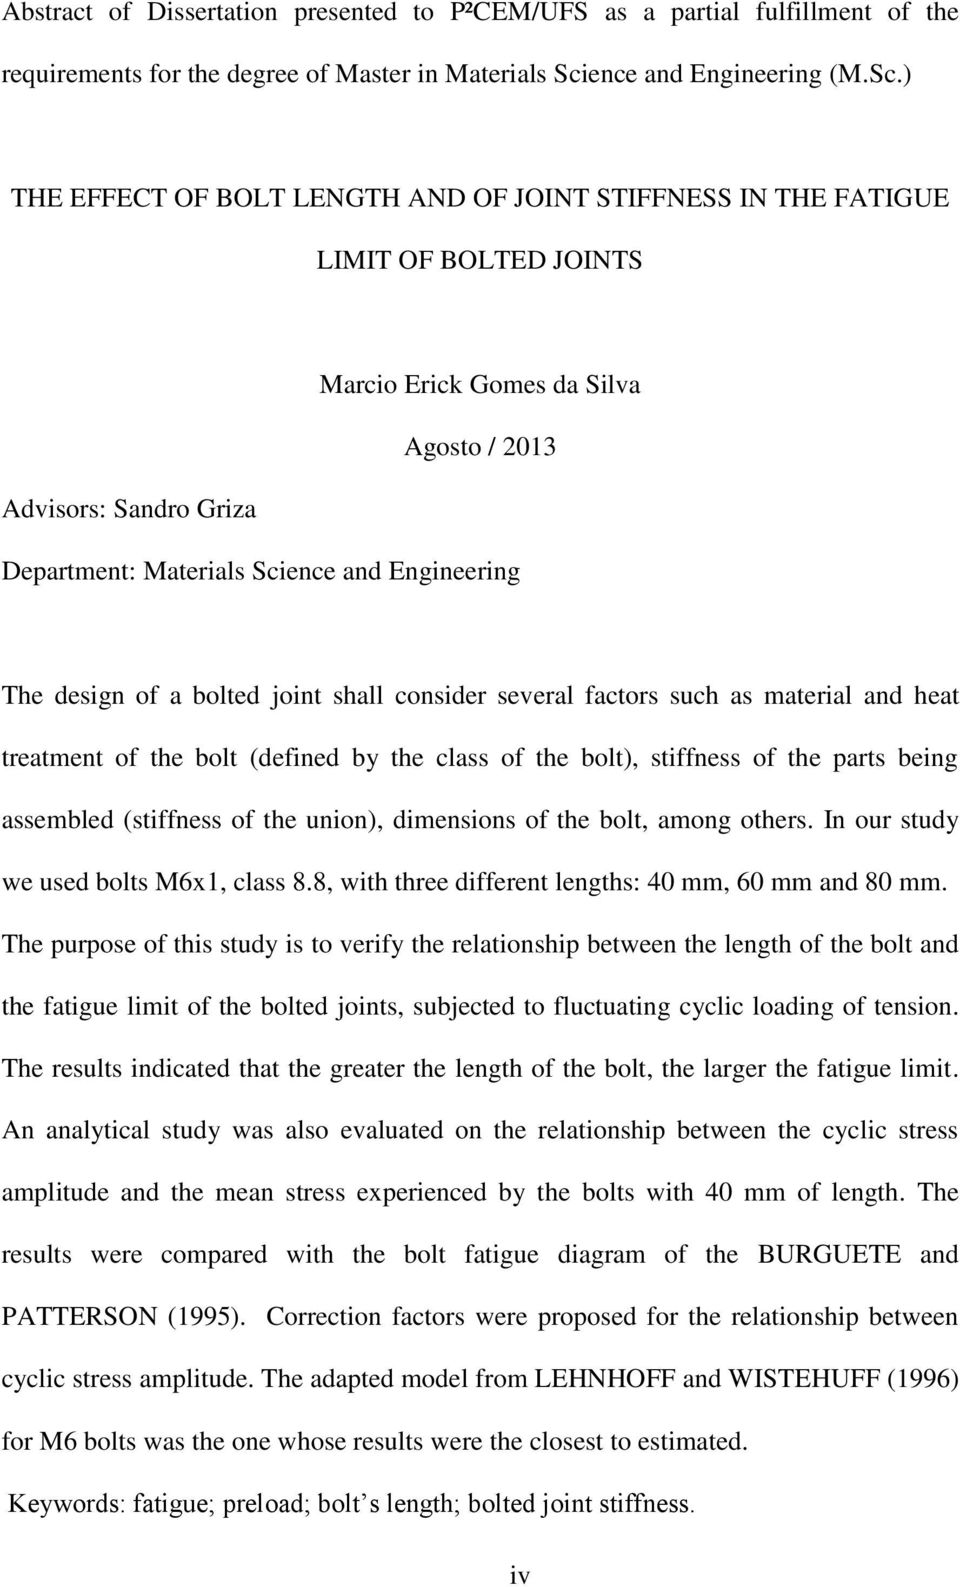 ) THE EFFECT OF BOLT LENGTH AND OF JOINT STIFFNESS IN THE FATIGUE LIMIT OF BOLTED JOINTS Marcio Erick Gomes da Silva Agosto / 2013 Advisors: Sandro Griza Department: Materials Science and Engineering